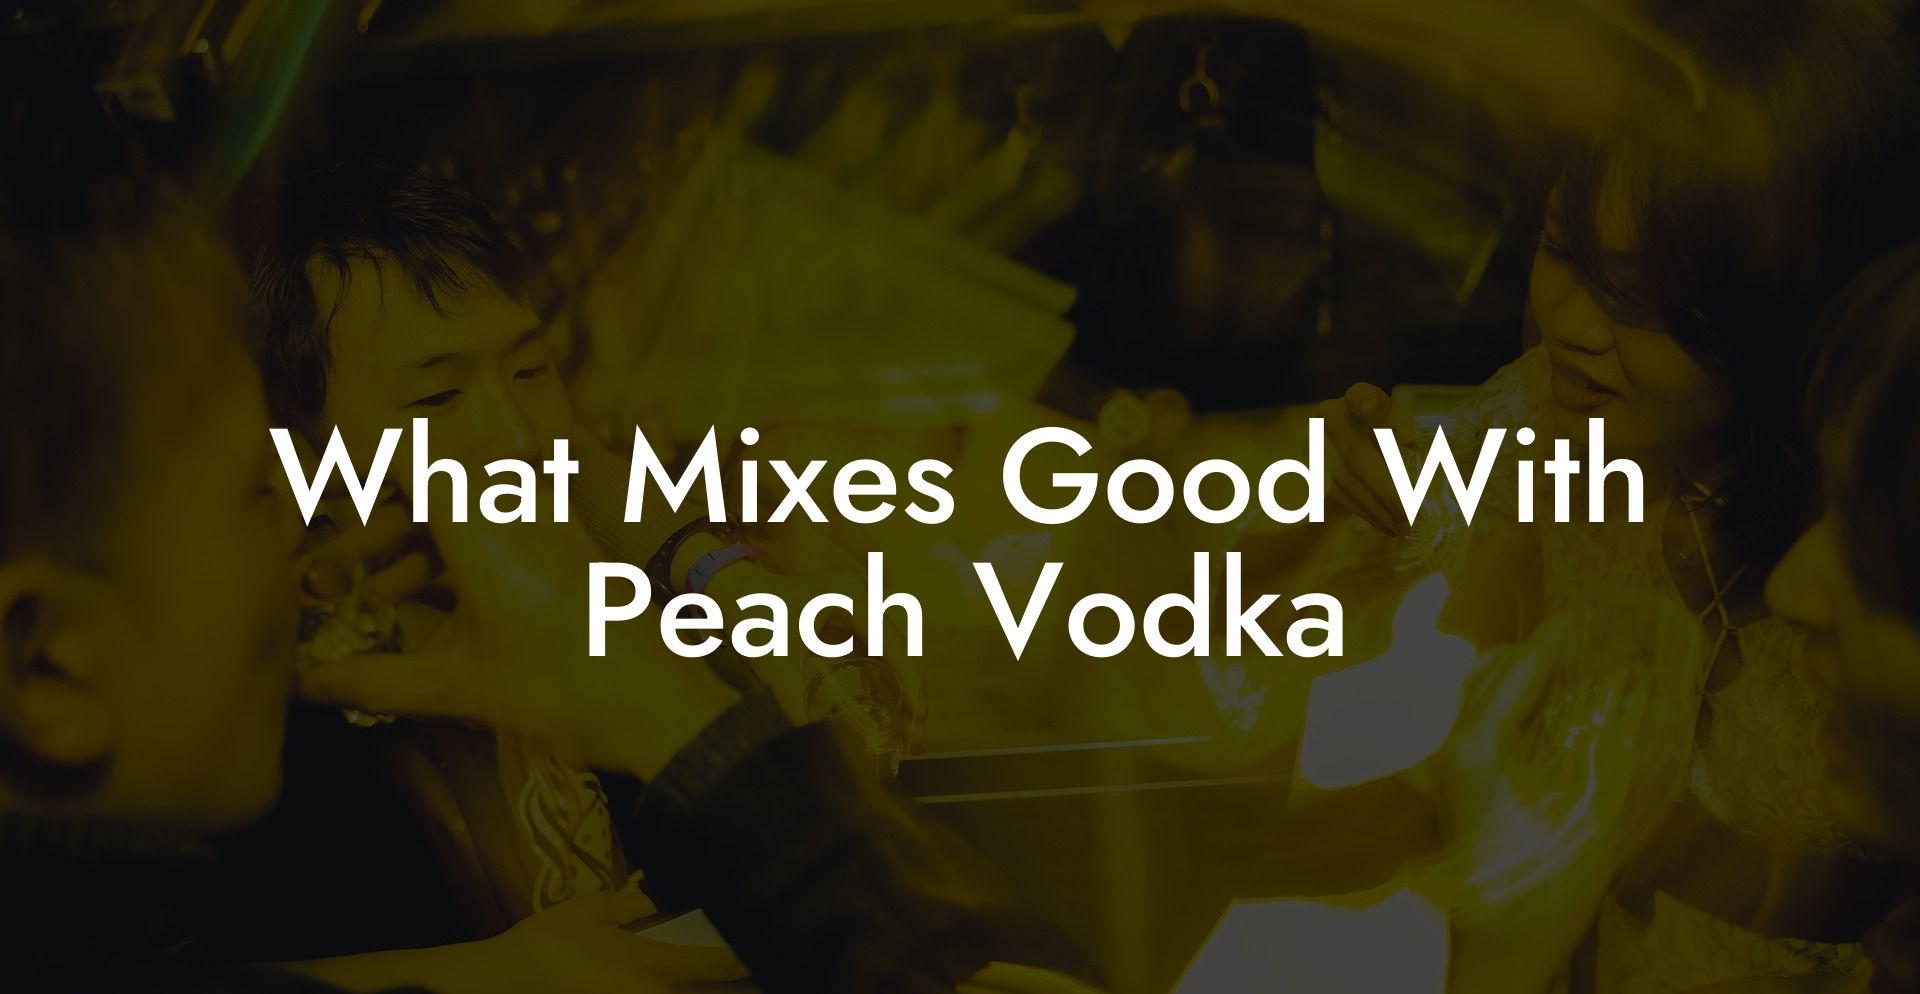 What Mixes Good With Peach Vodka